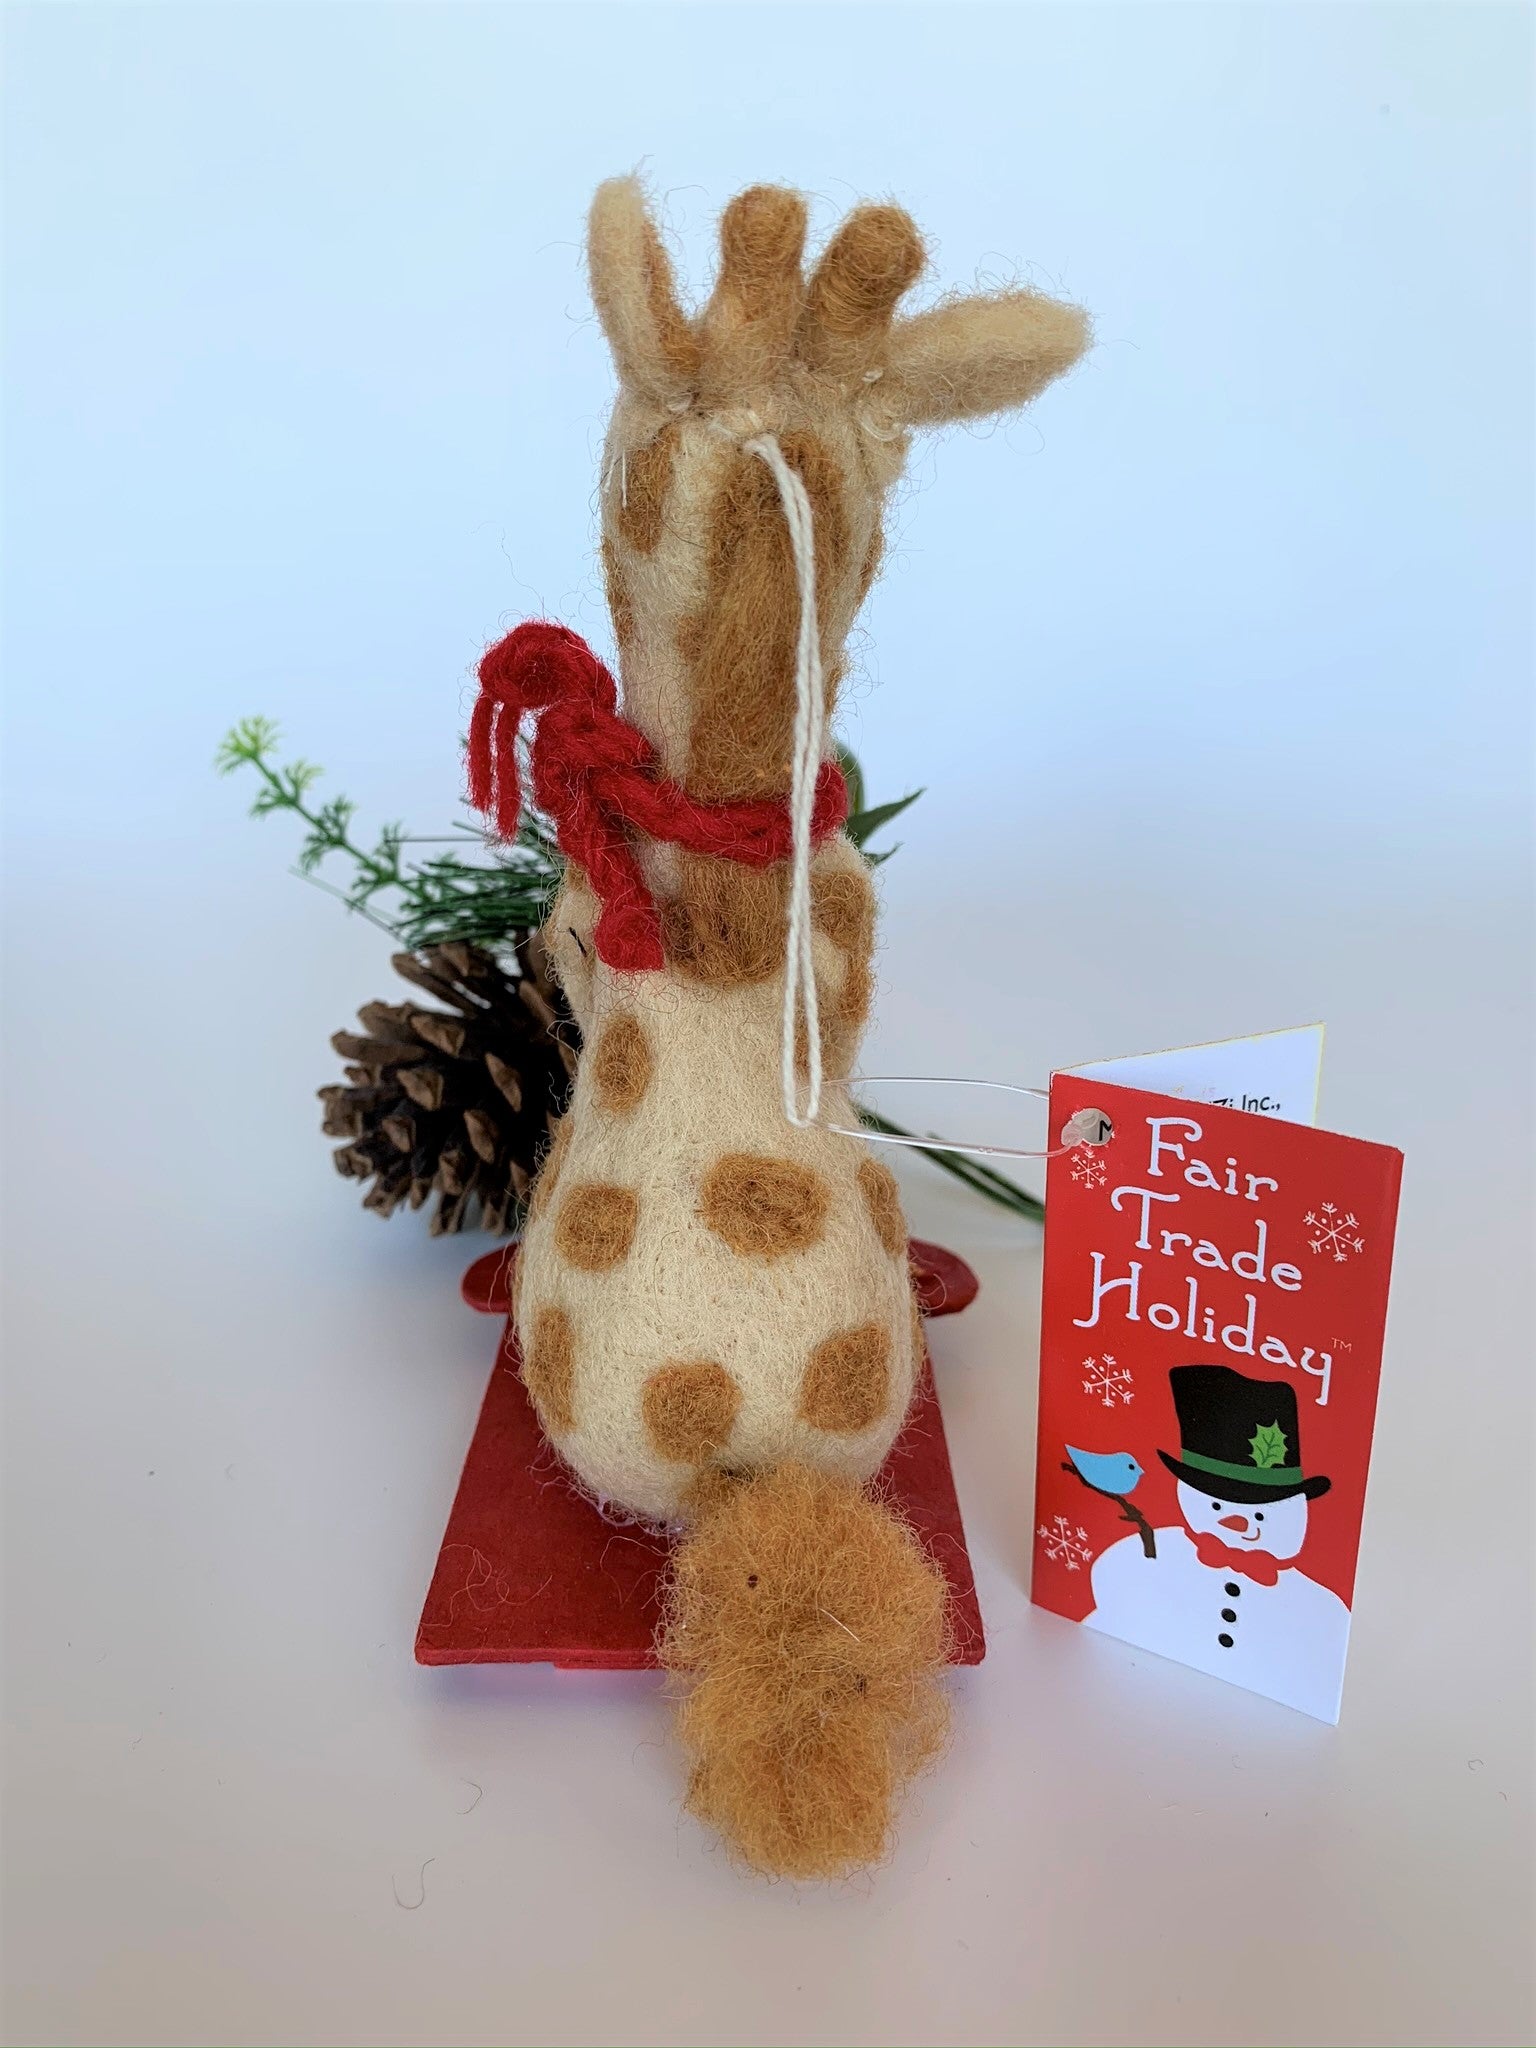 This is a back view of a sledding giraffe Christmas ornament that is handcrafted (fair trade) and made of 100% natural wool. The sled is handmade using paper that is hardened and feels almost like thin wood. It is tan with brown spots, gray accents on feet and hands, with black accents (mouth, eyes, etc.) and wearing a red winter scarf. It sits on a red sled, holding a gold sled "rope." Approximately 6"x4.75x1.5". It comes with a fair trade holiday "to/from" tag to use if giving this as a gift.